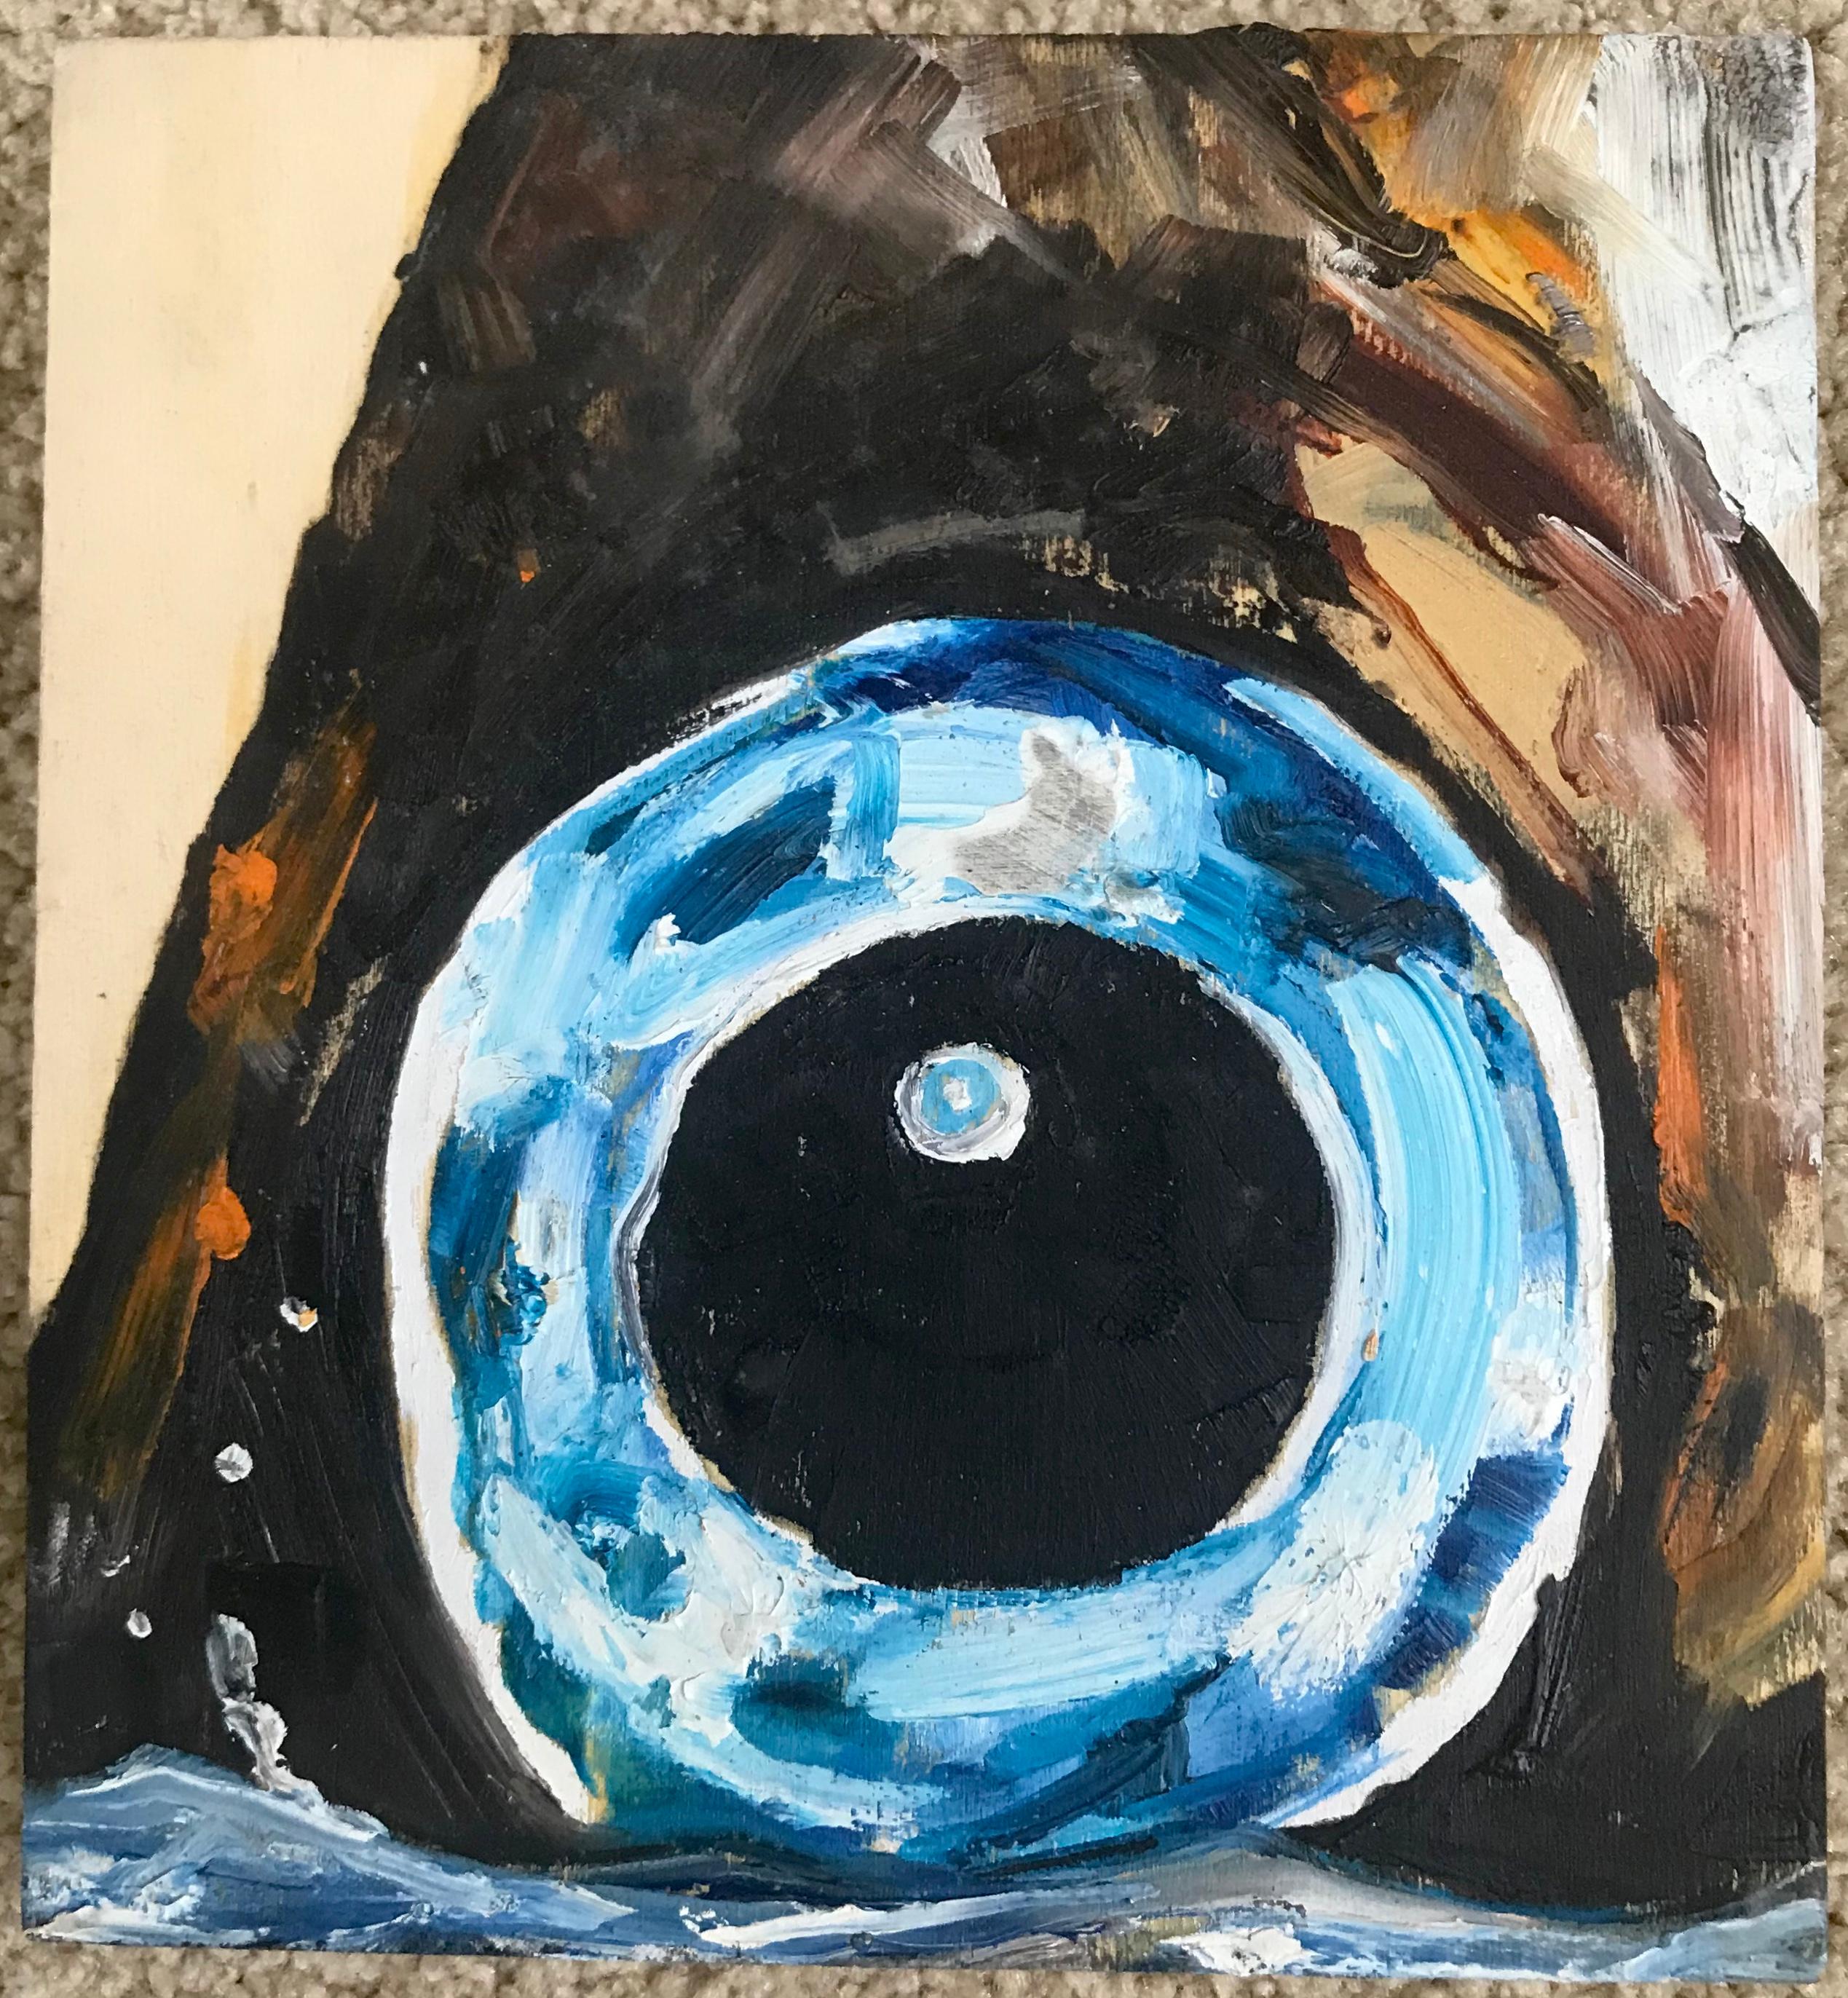 Fish eye painting. Contemporary white, vivid blue and black acrylic painting on raw wood panel “Occhio di Pesce.”, Italy, 2019.
Dimensions: 6.75” H x 6.25” W x .75” D.